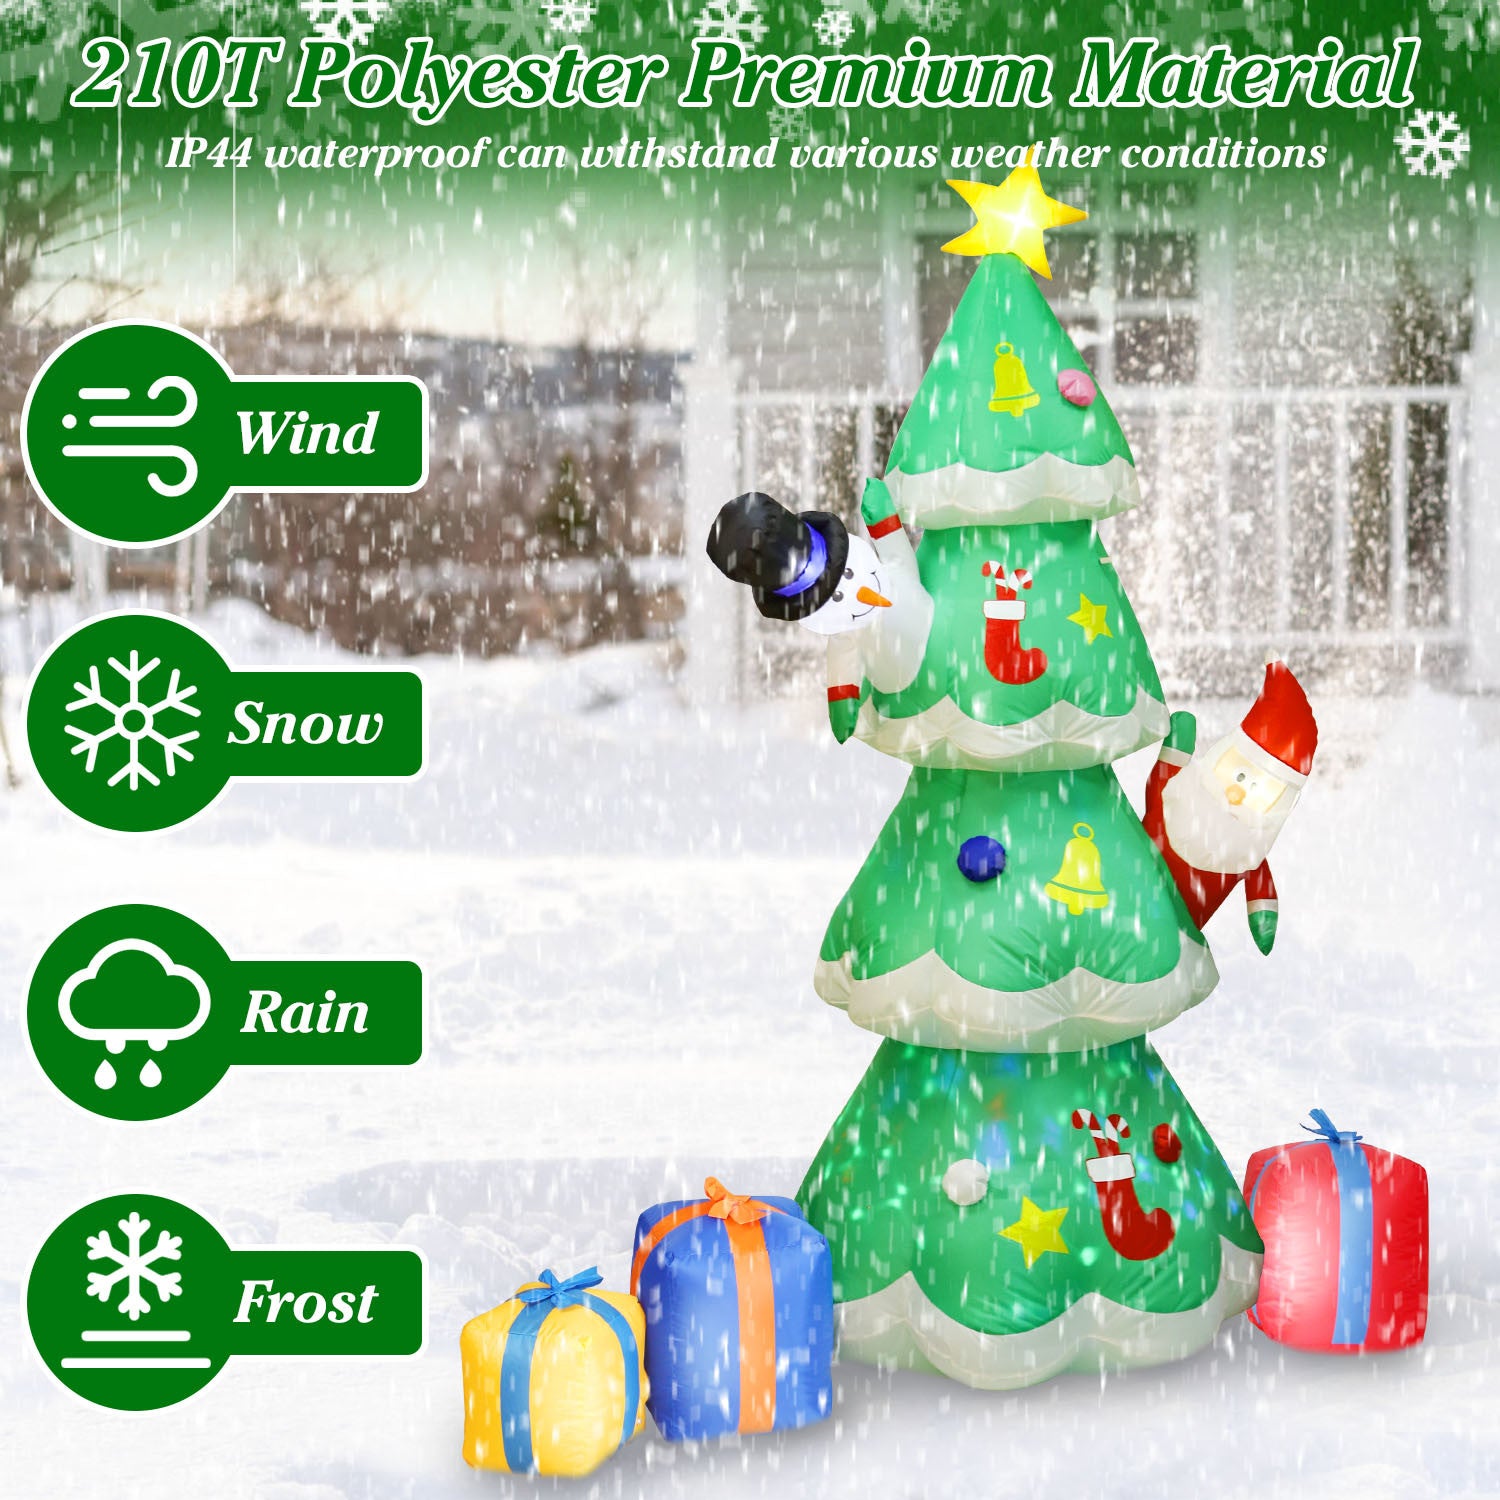 Inflatable 6.89FT Christmas Inflatable Outdoor Decoration with Christmas Tree Gift Box Santa Claus Blow Up Yard Decoration with LED Light Built-in Air Blower for Winter Holiday Xmas Garden decorated with Santa Claus.